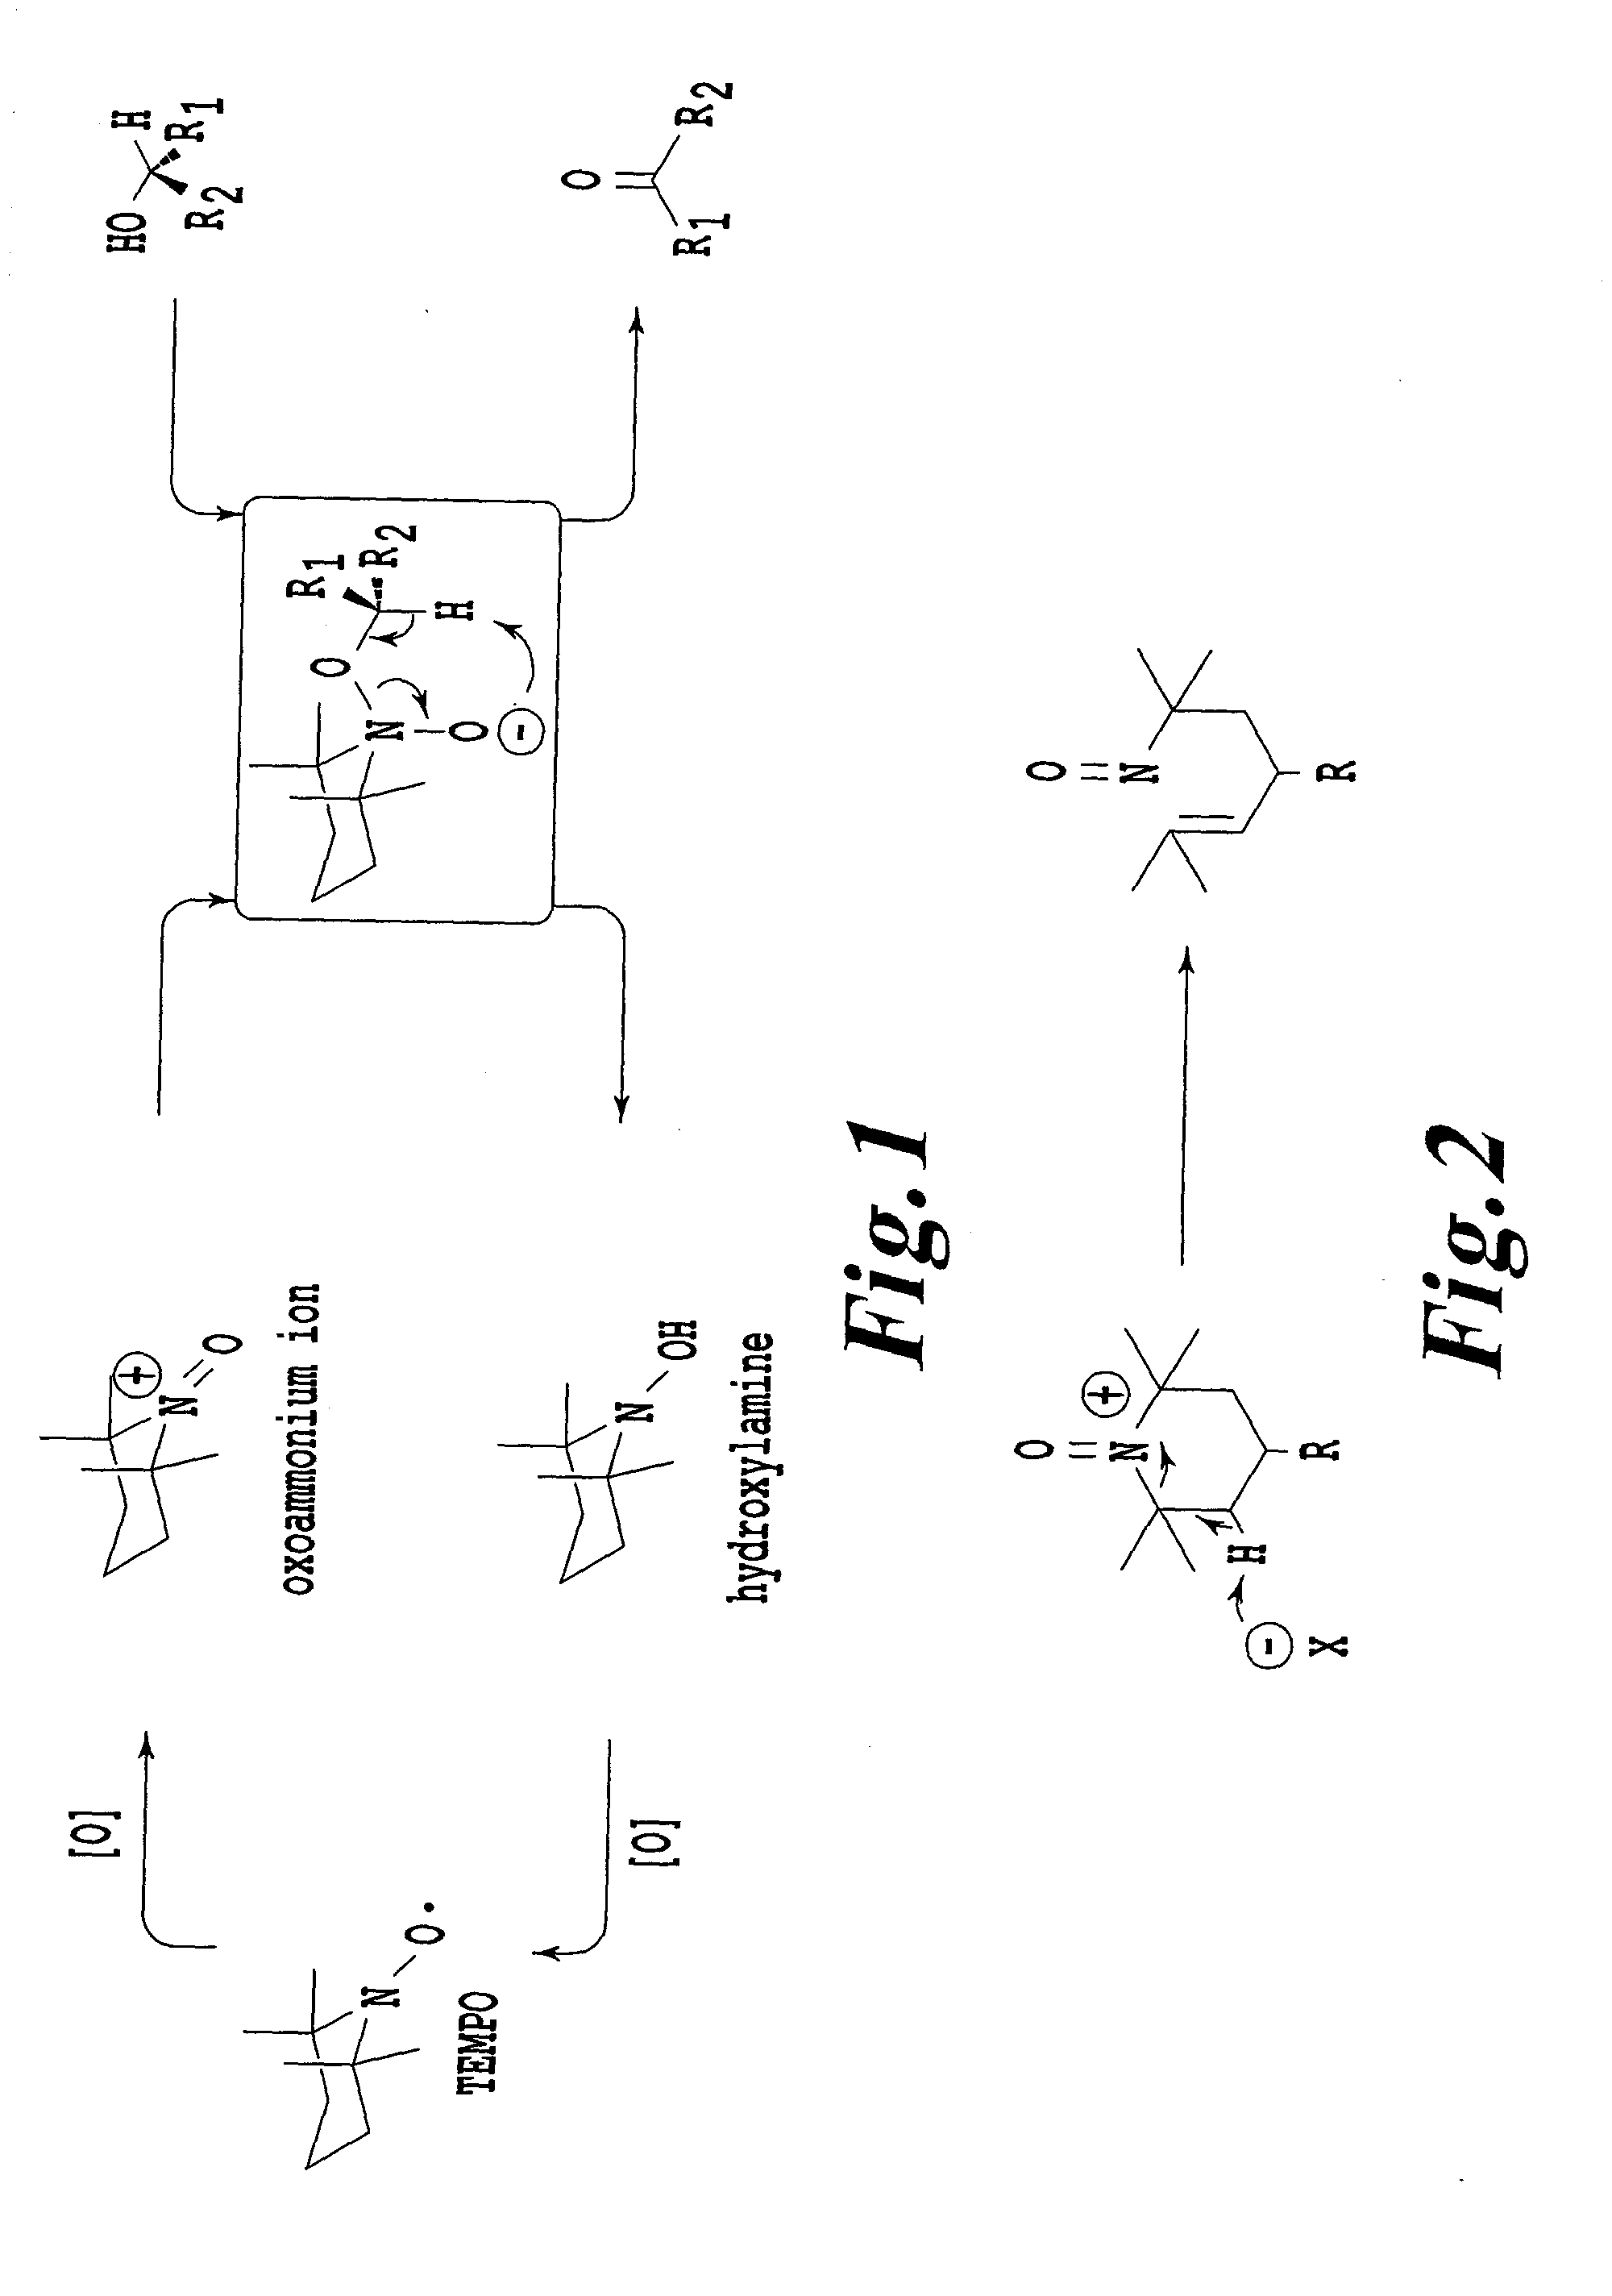 Alcohol oxidation catalyst and its preparation process